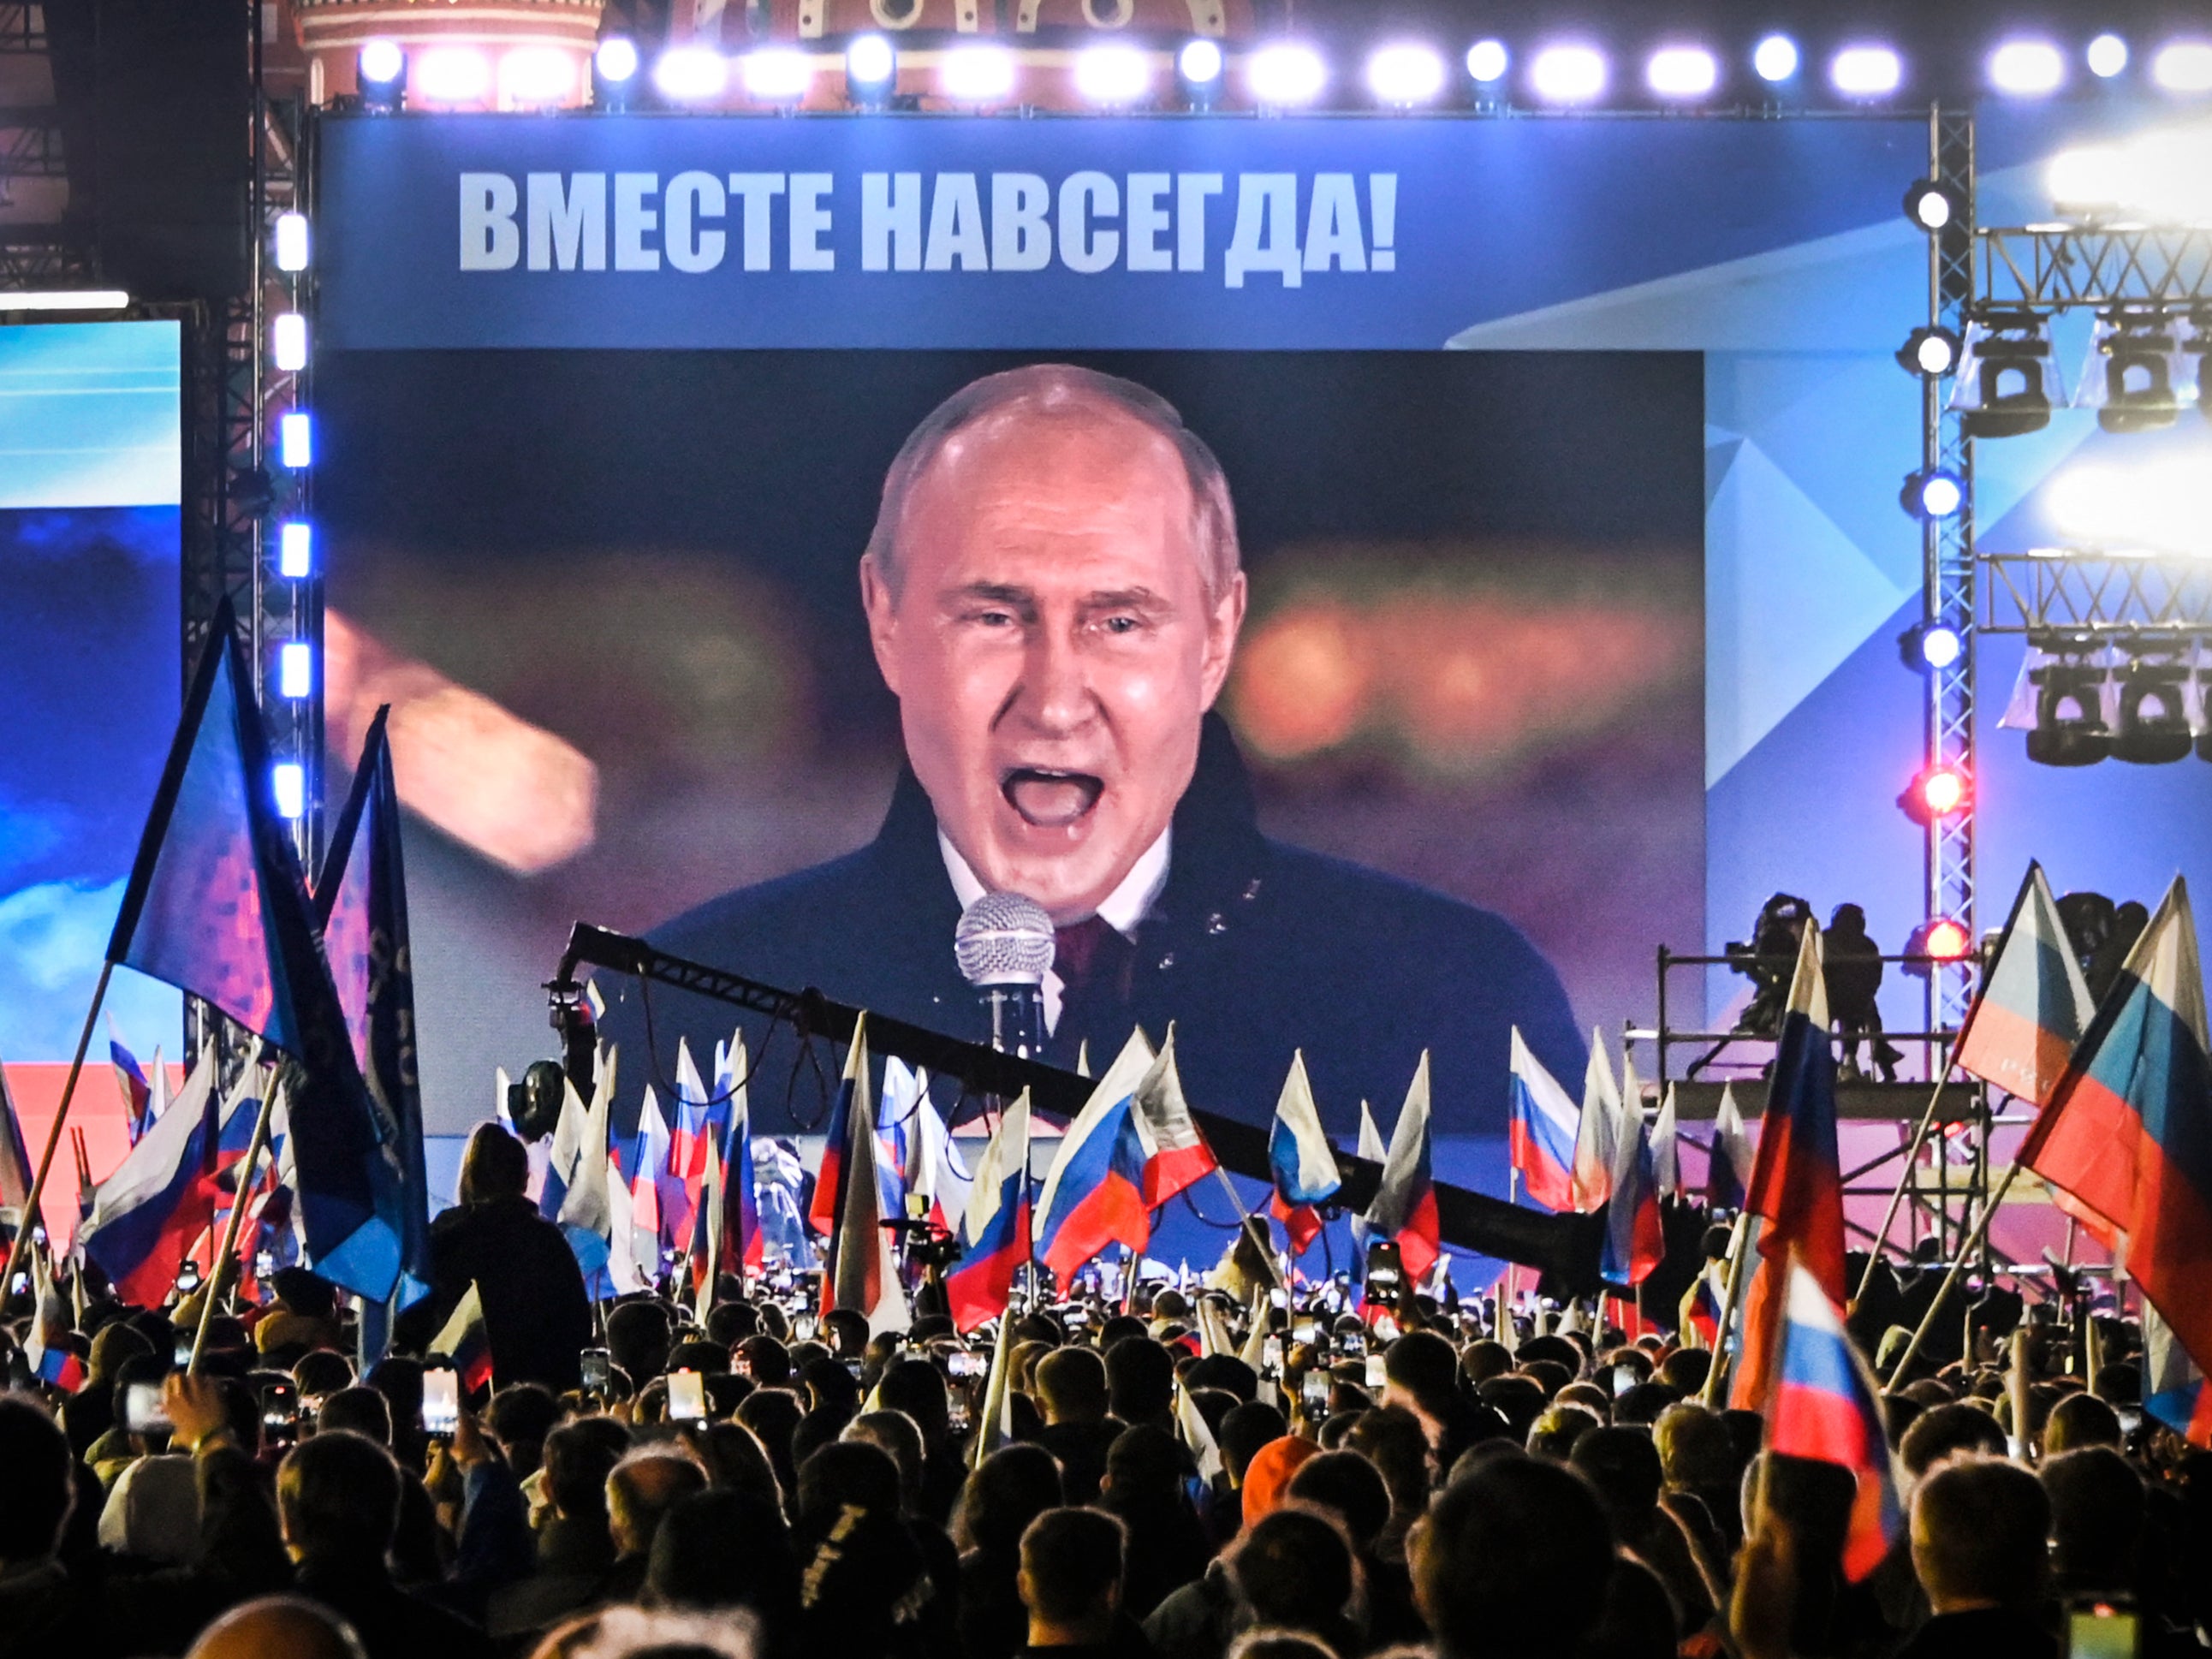 President Putin addresses a rally in Moscow marking the annexation of four regions of Ukraine